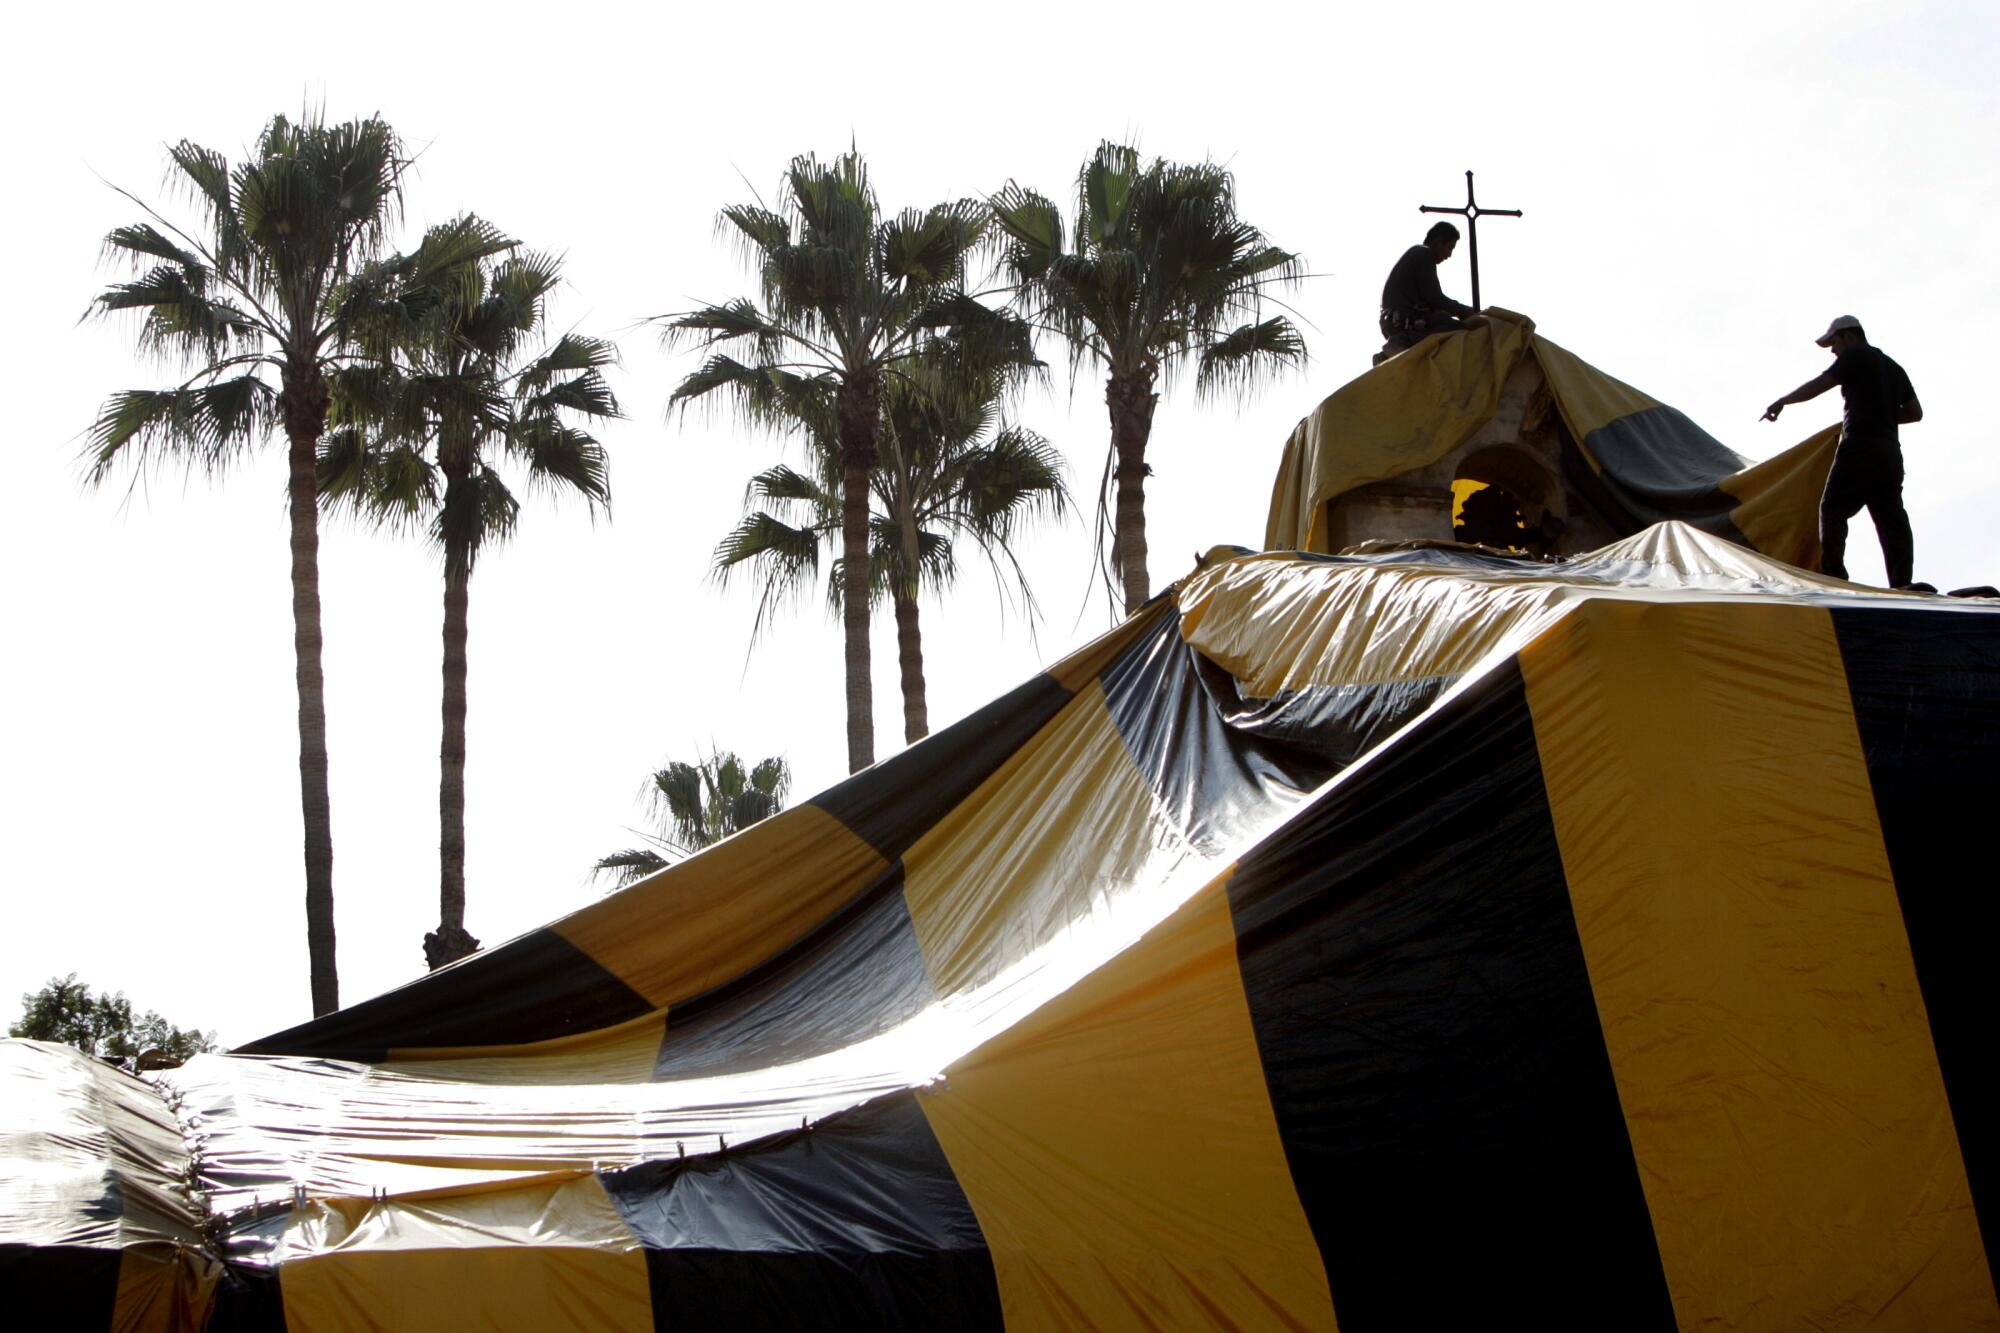 Workers drape a black and yellow fumigation tent over a building.